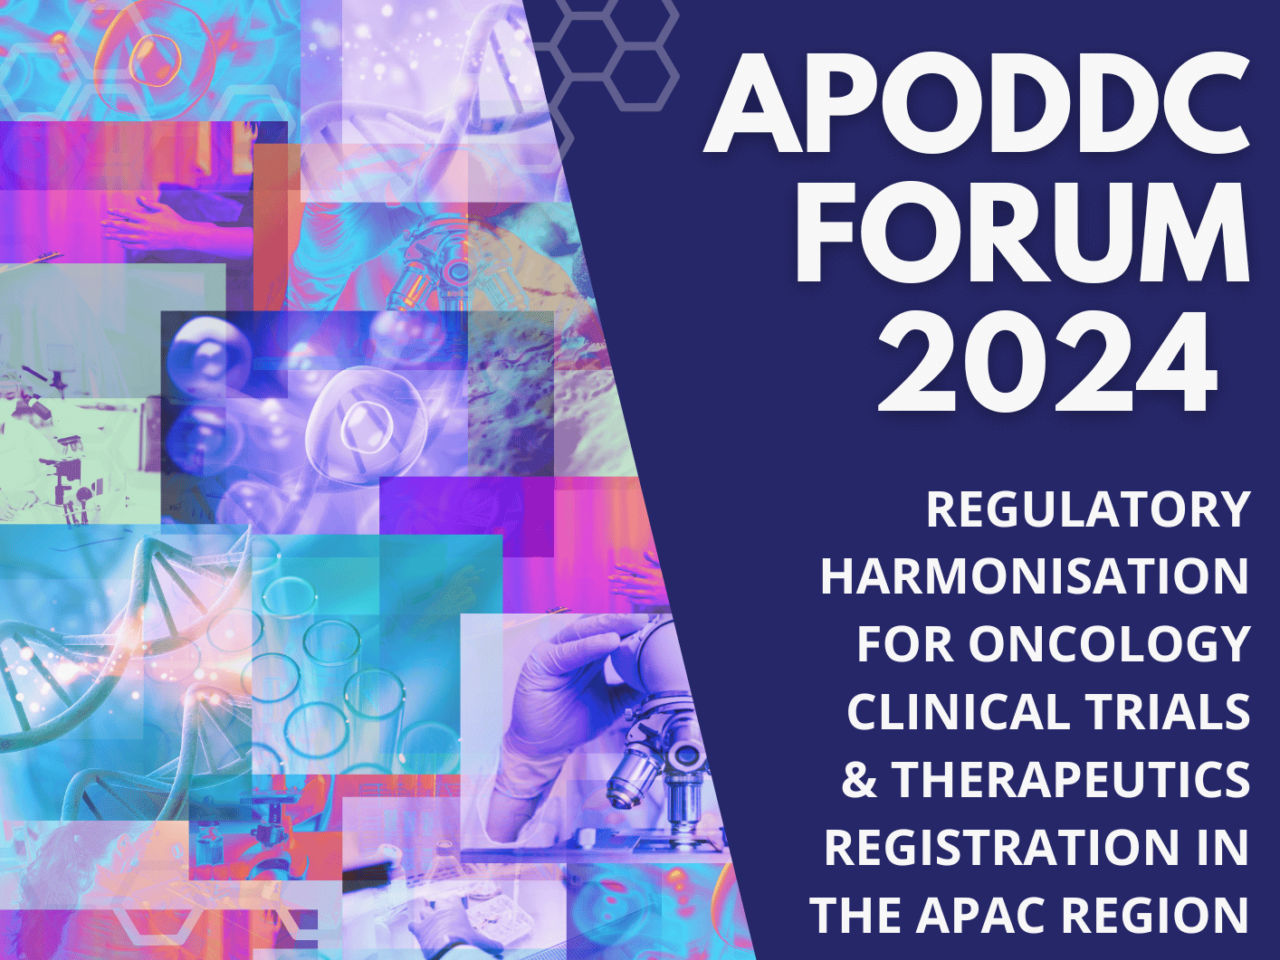 Herbert Loong: Looking forward to the first APODDC forum next Friday